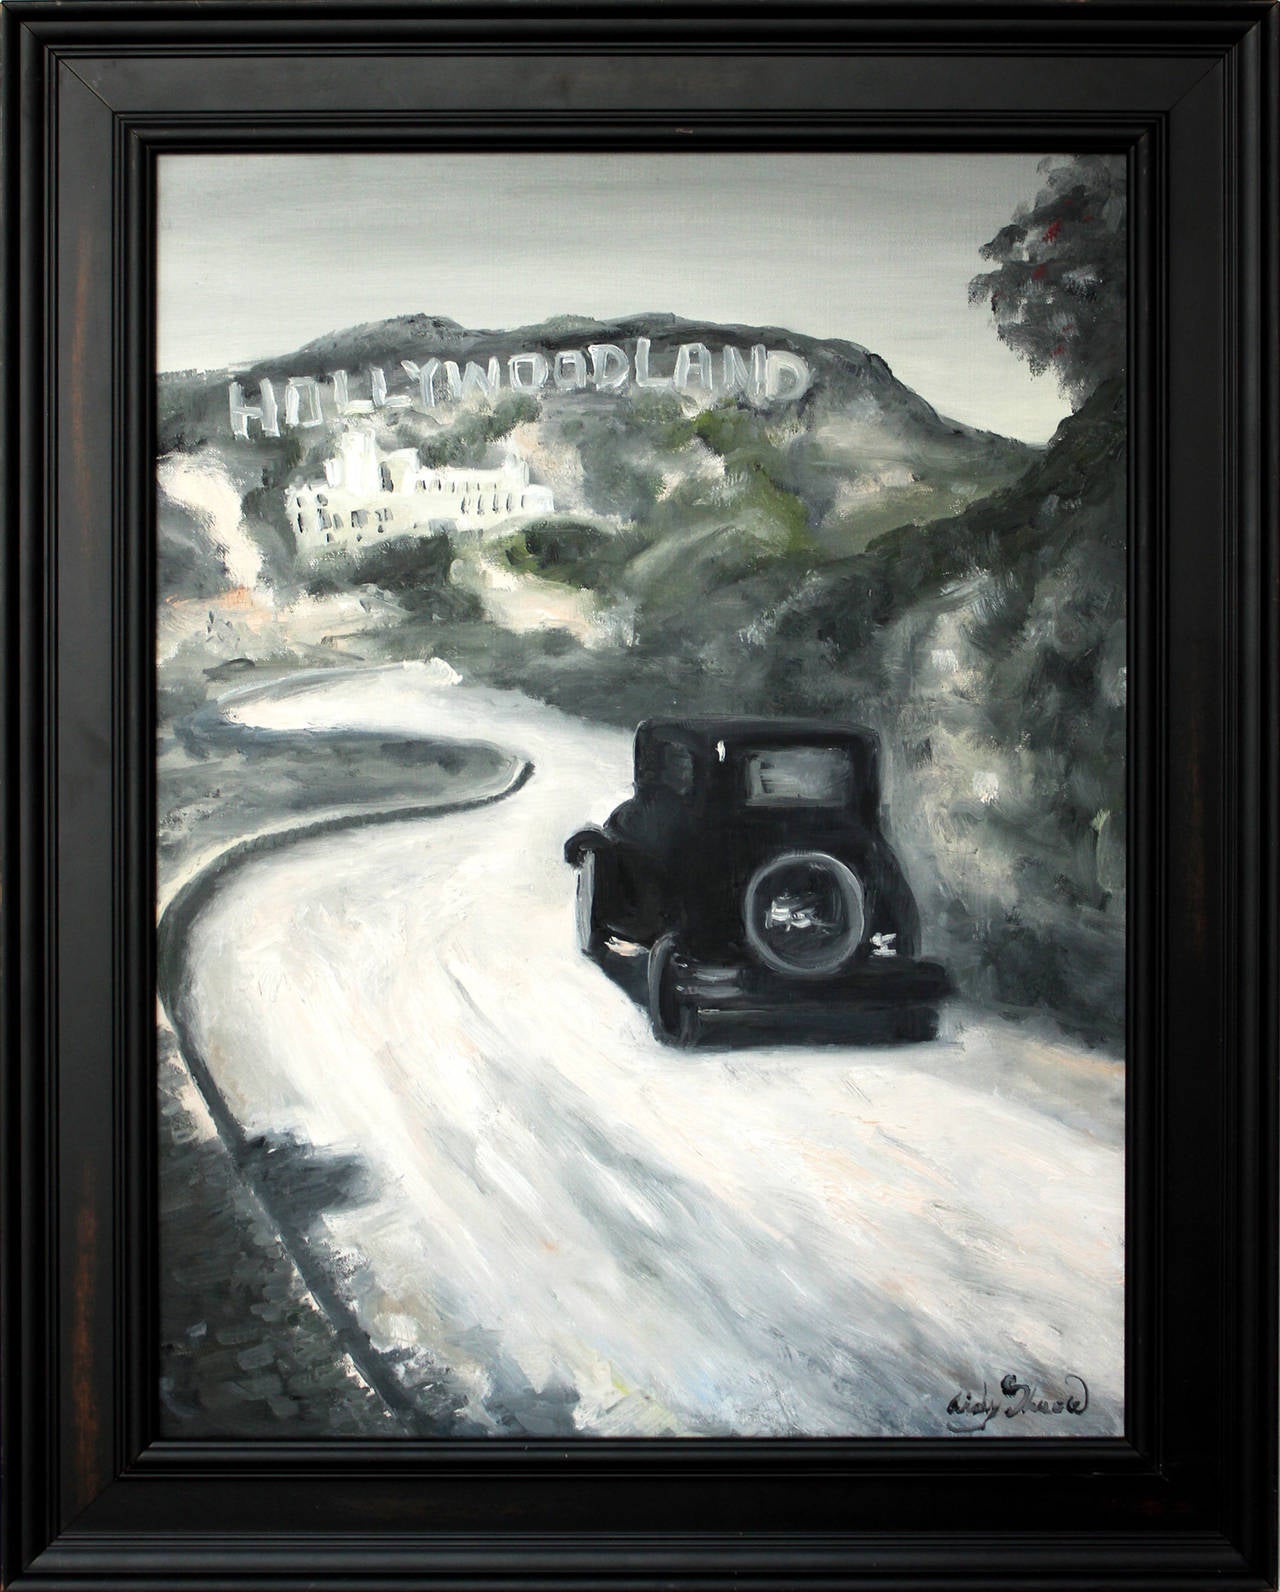 Cindy Shaoul Landscape Painting - "Going to Work" Old Hollywood Style Black and White Oil Painting on Canvas